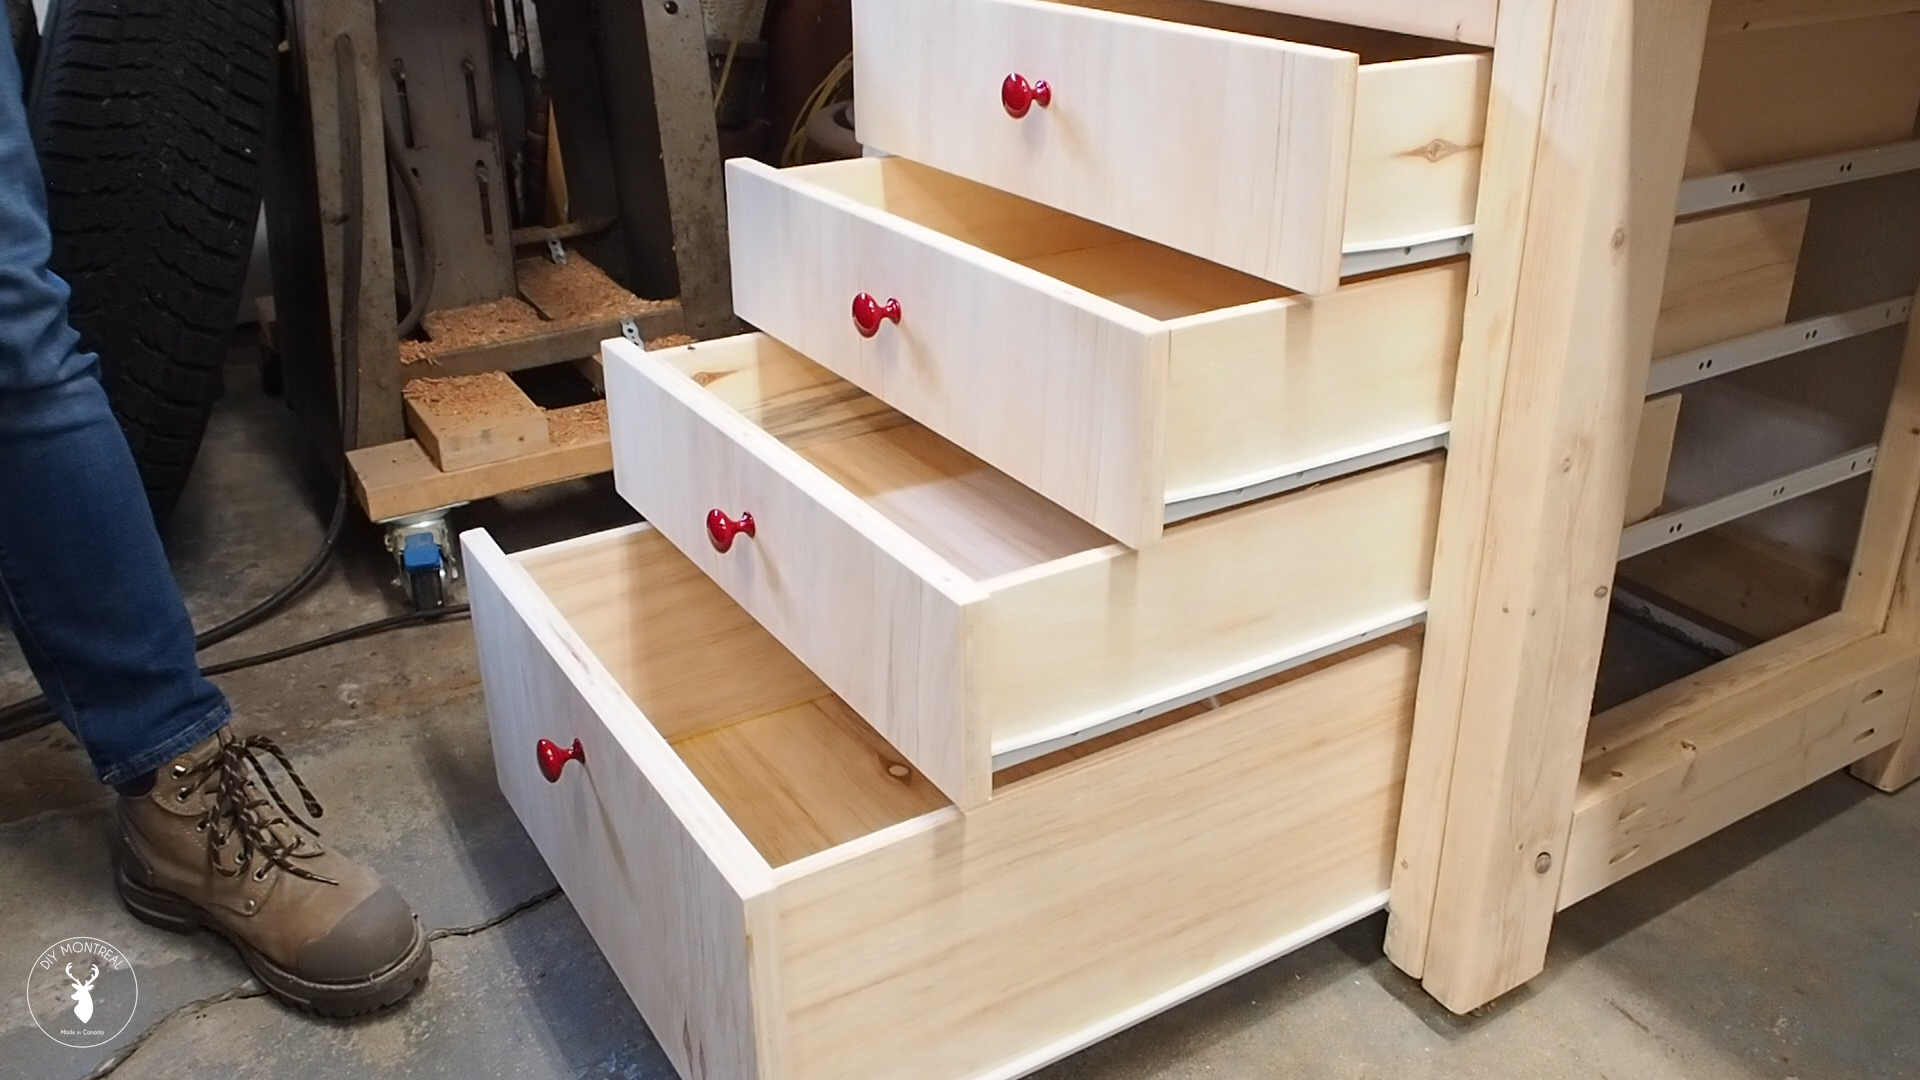 https://www.diymontreal.com/wp-content/uploads/2019/04/drawers-finished.jpg